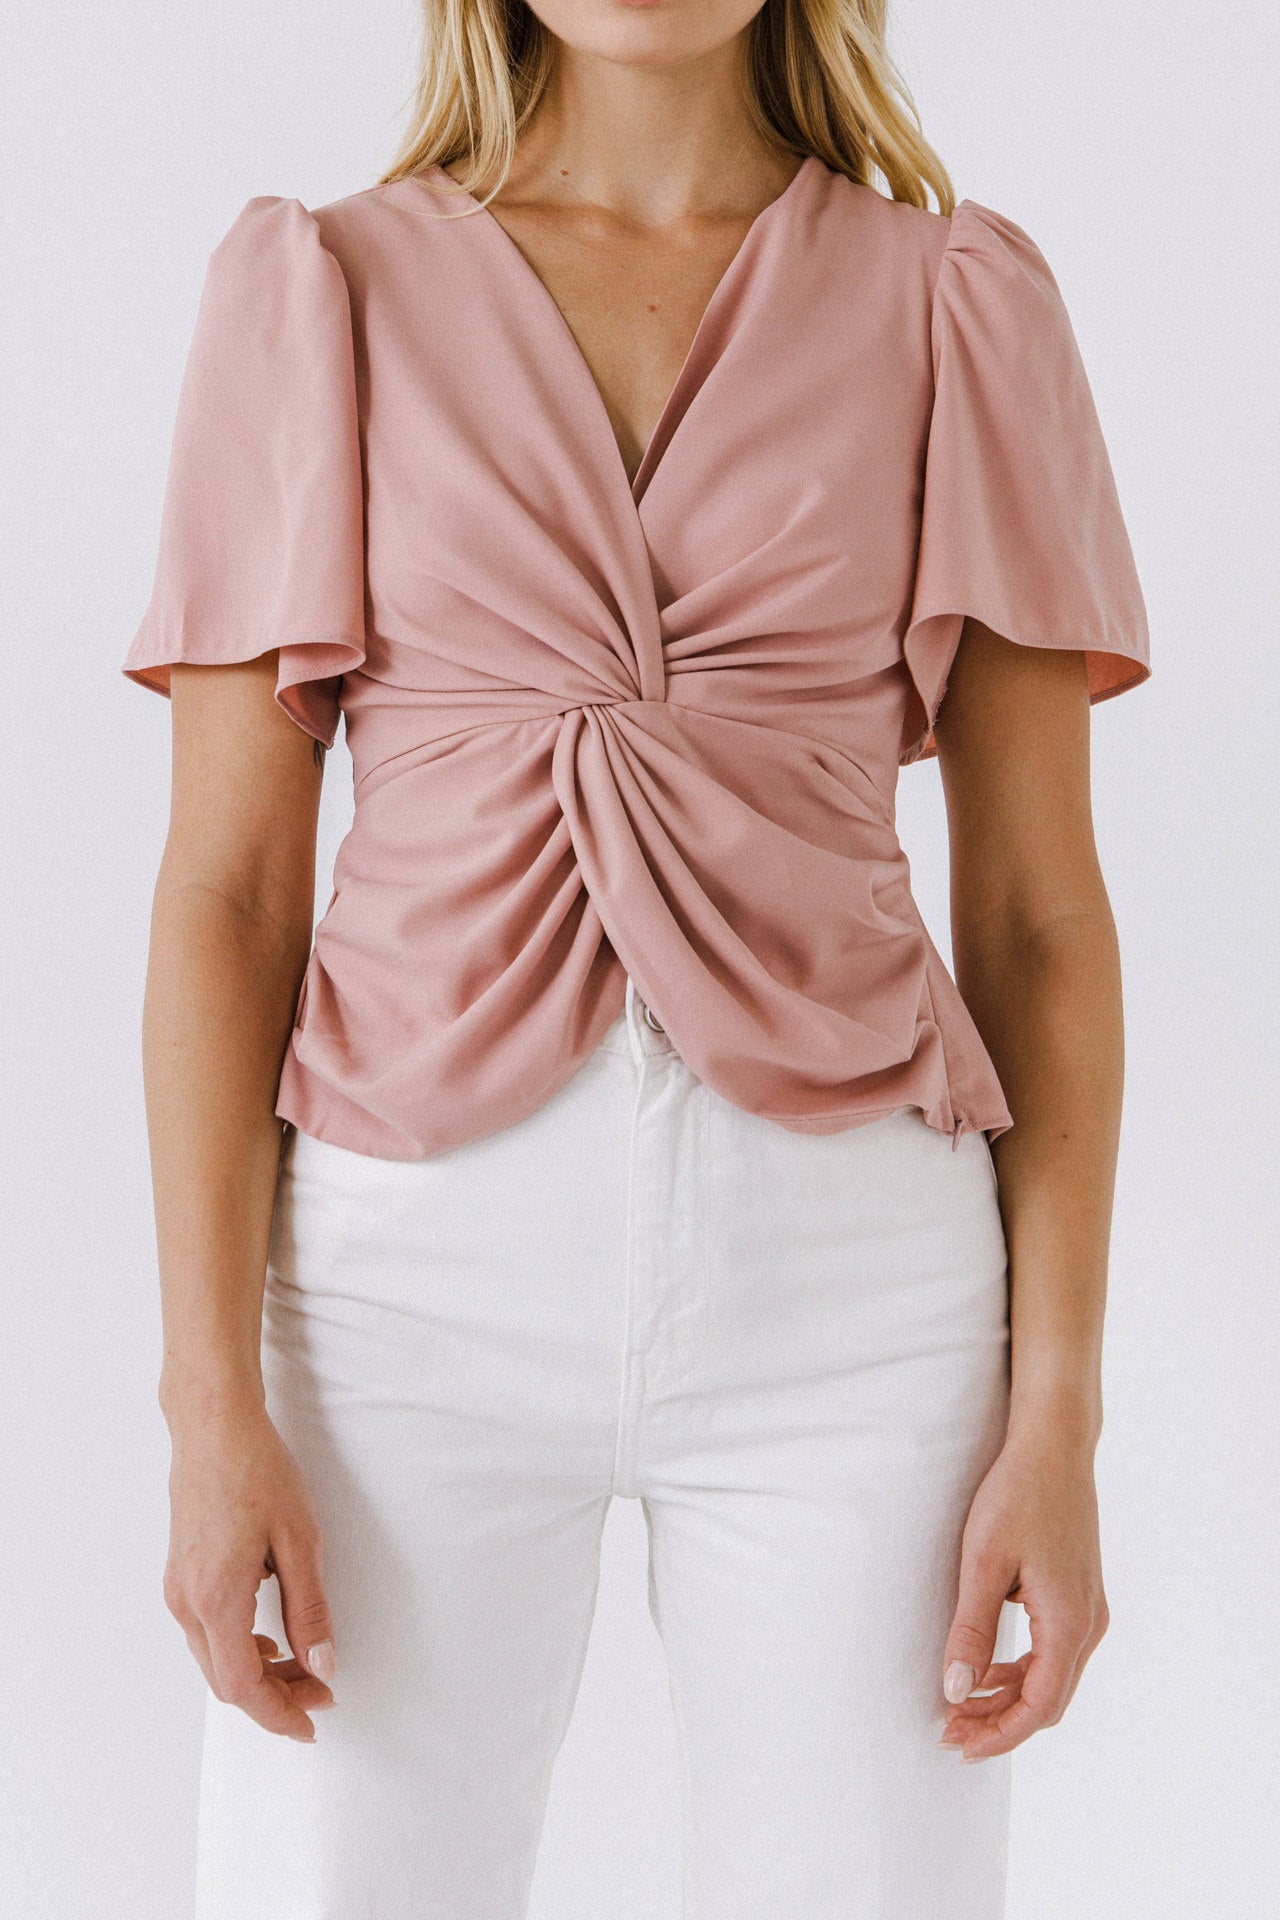 Endless Rose - Solid Knotted Top - Tops in Women's Clothing available at endlessrose.com